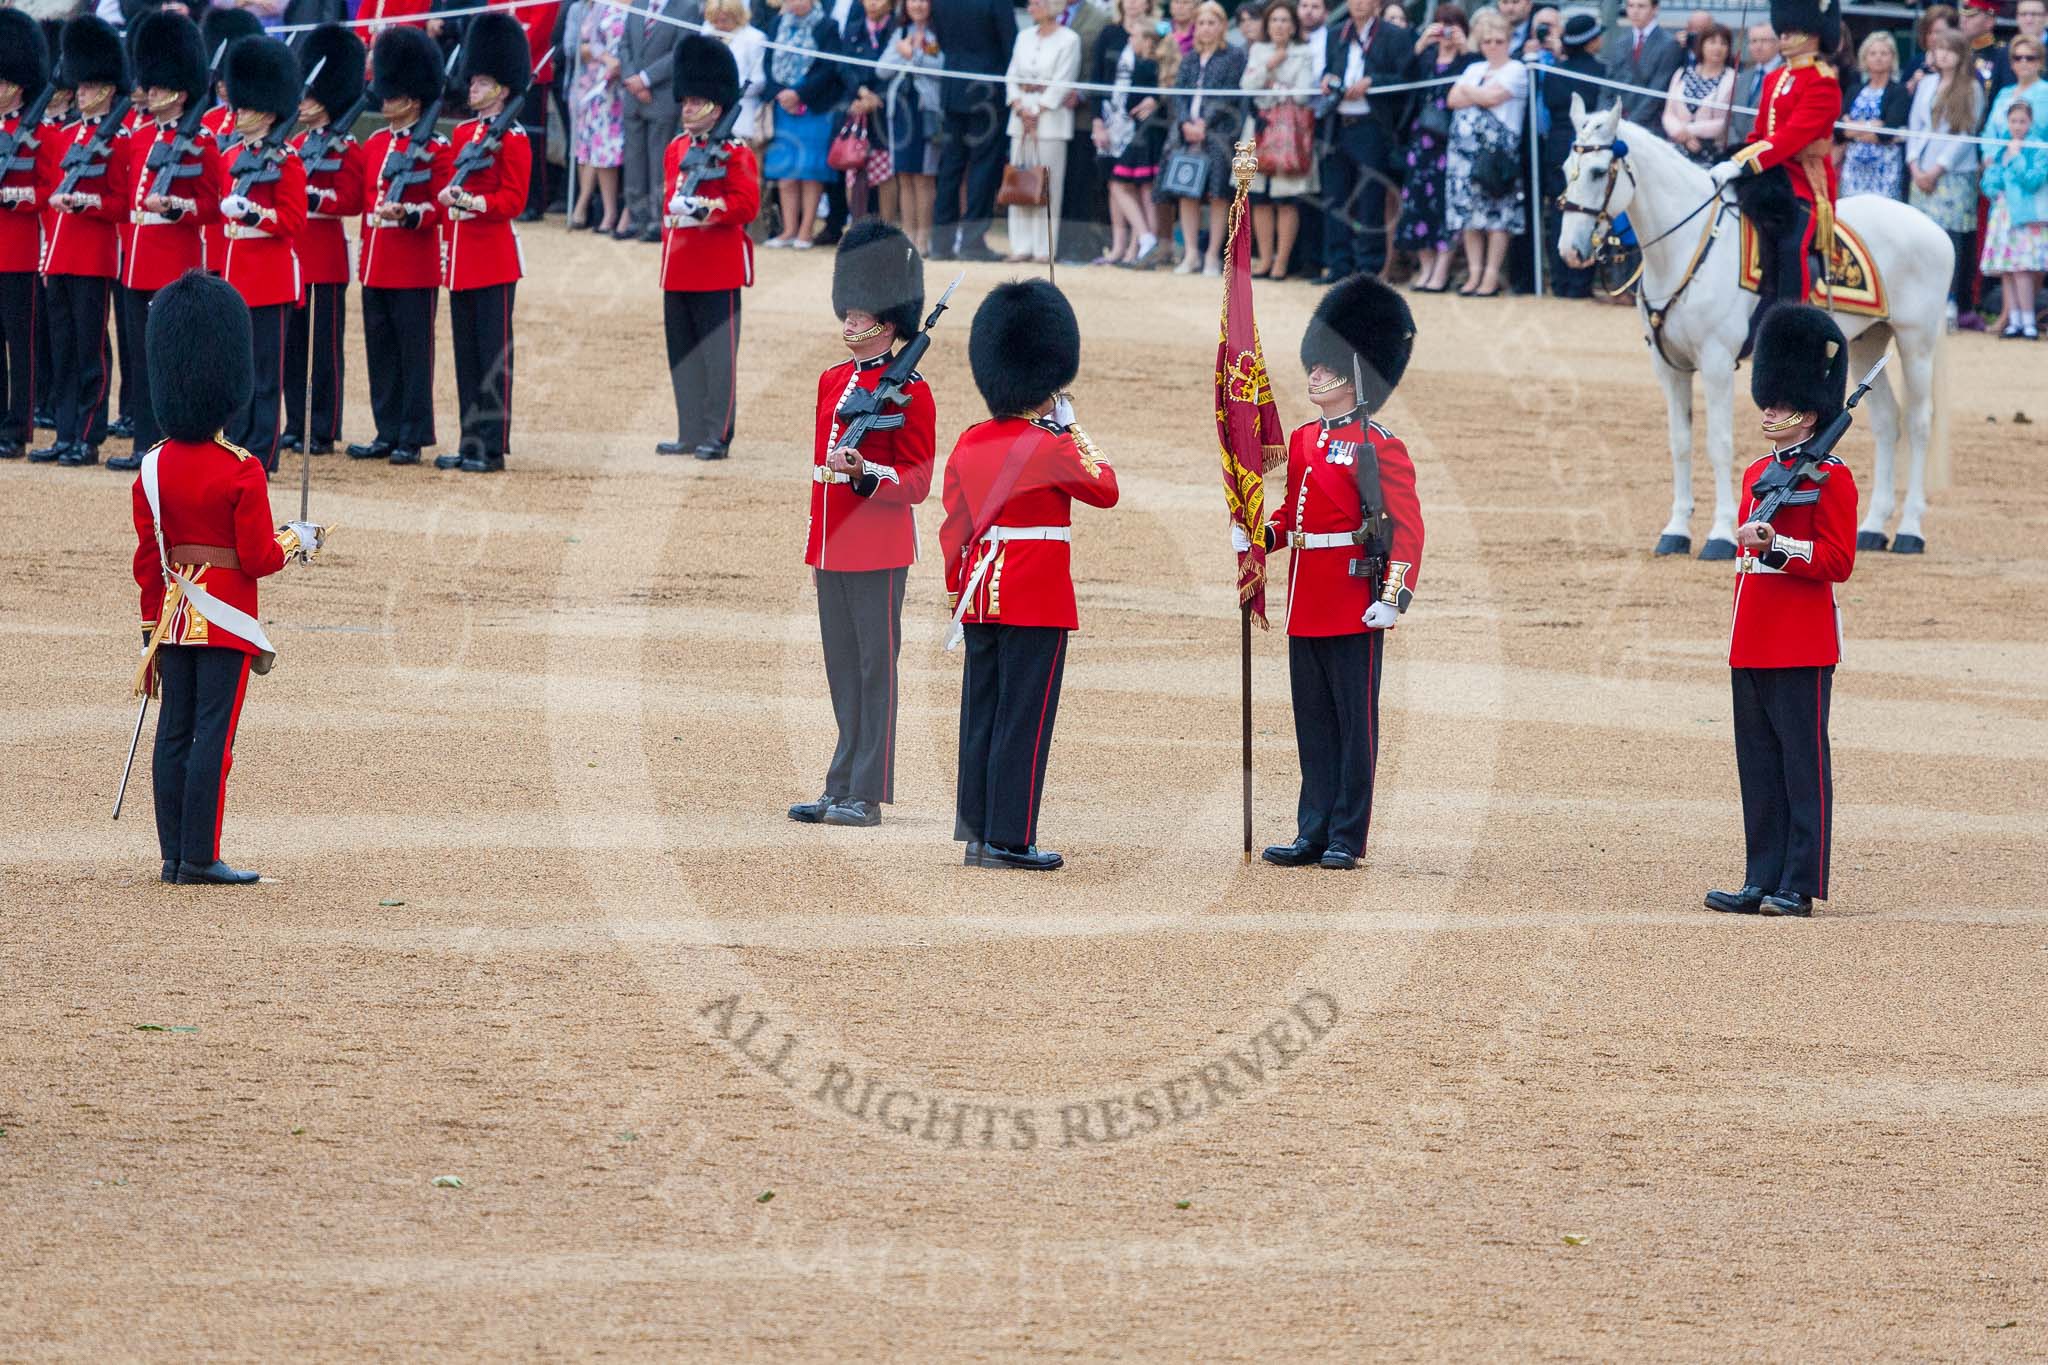 Trooping the Colour 2015. Image #378, 13 June 2015 11:19 Horse Guards Parade, London, UK